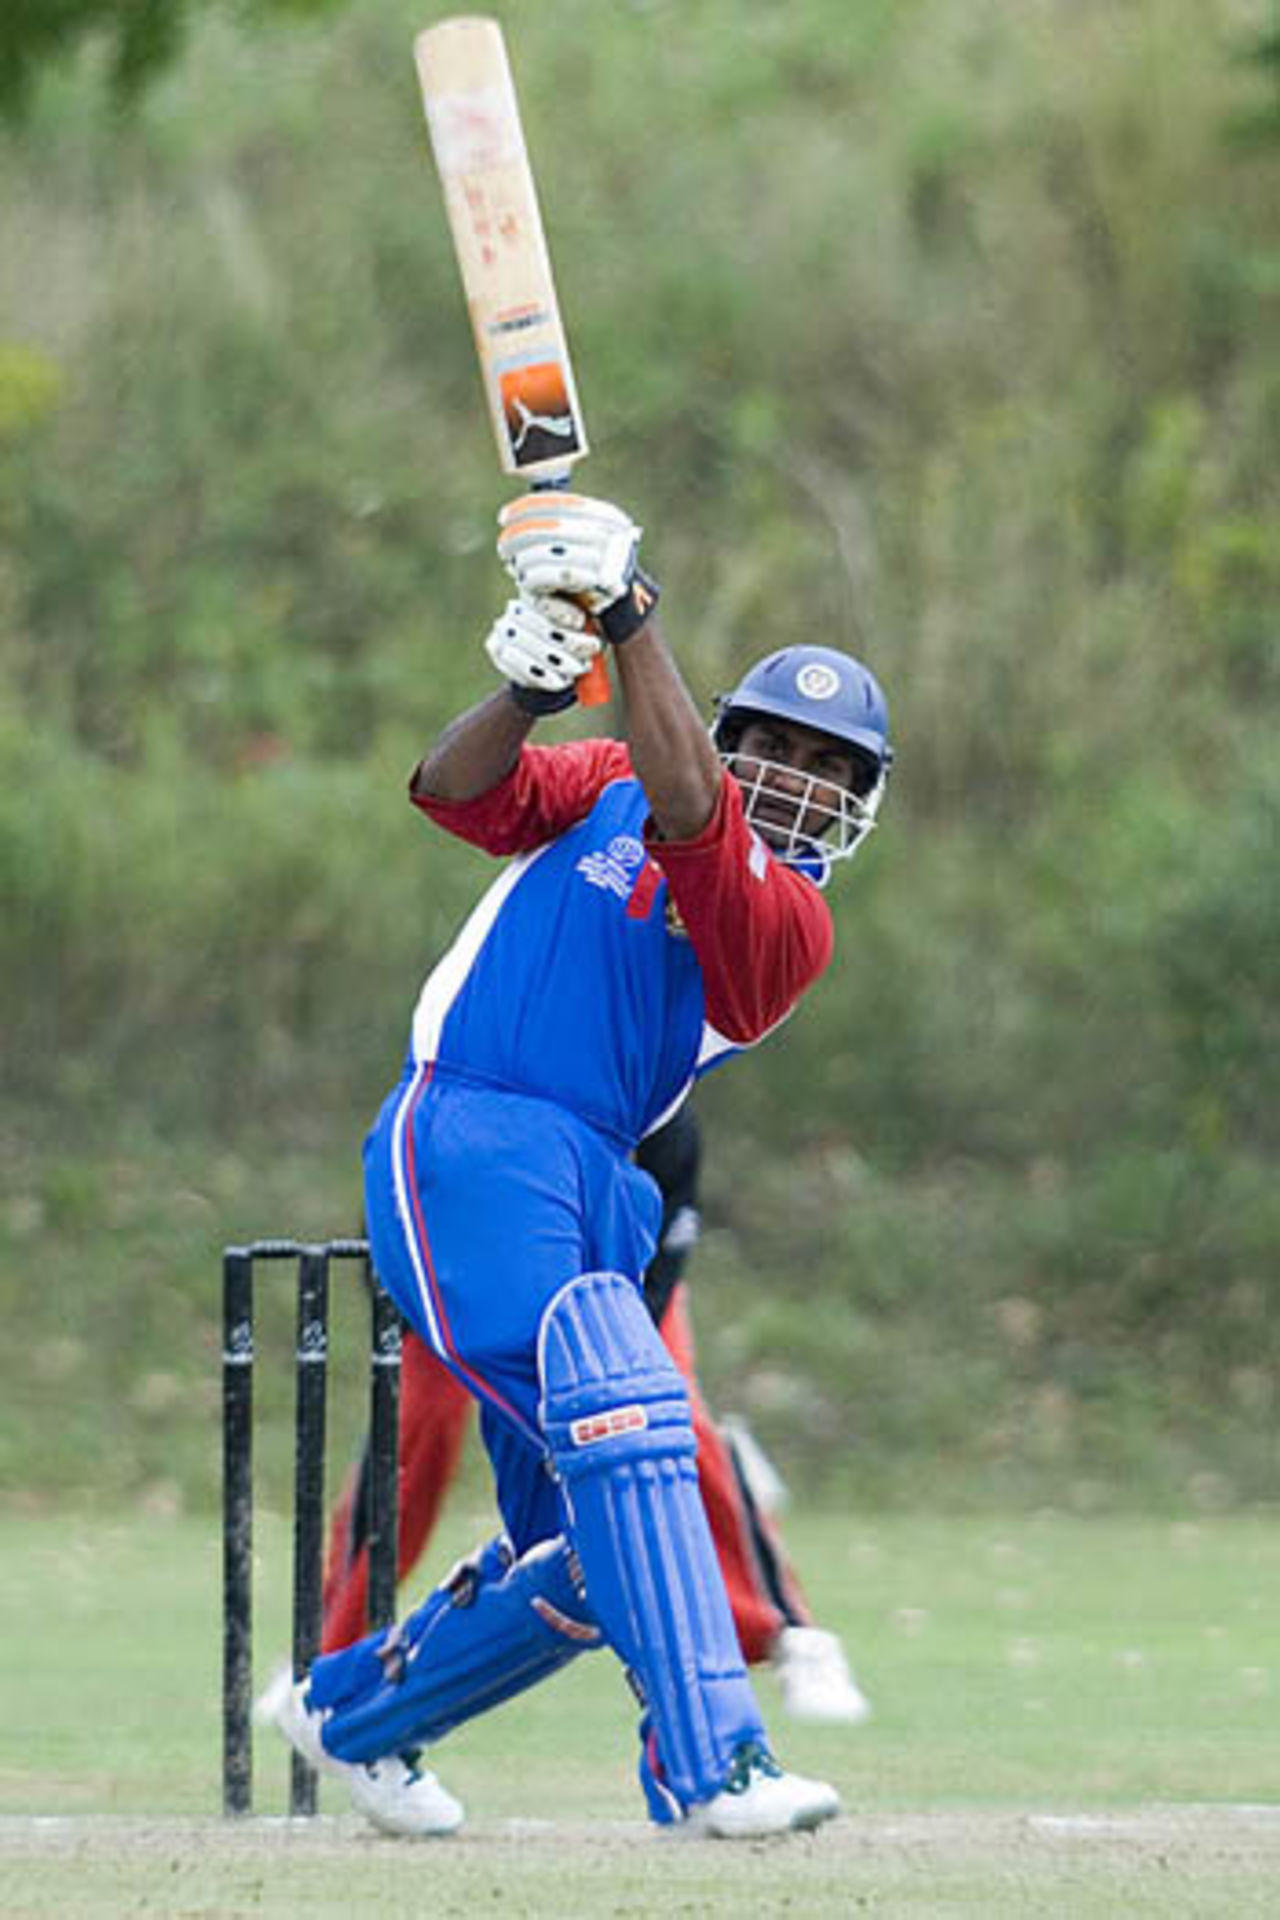 Ryan Bovell, the Cayman Islands captain, ICC World Cricket League Africa Region Division Two, August 2006
